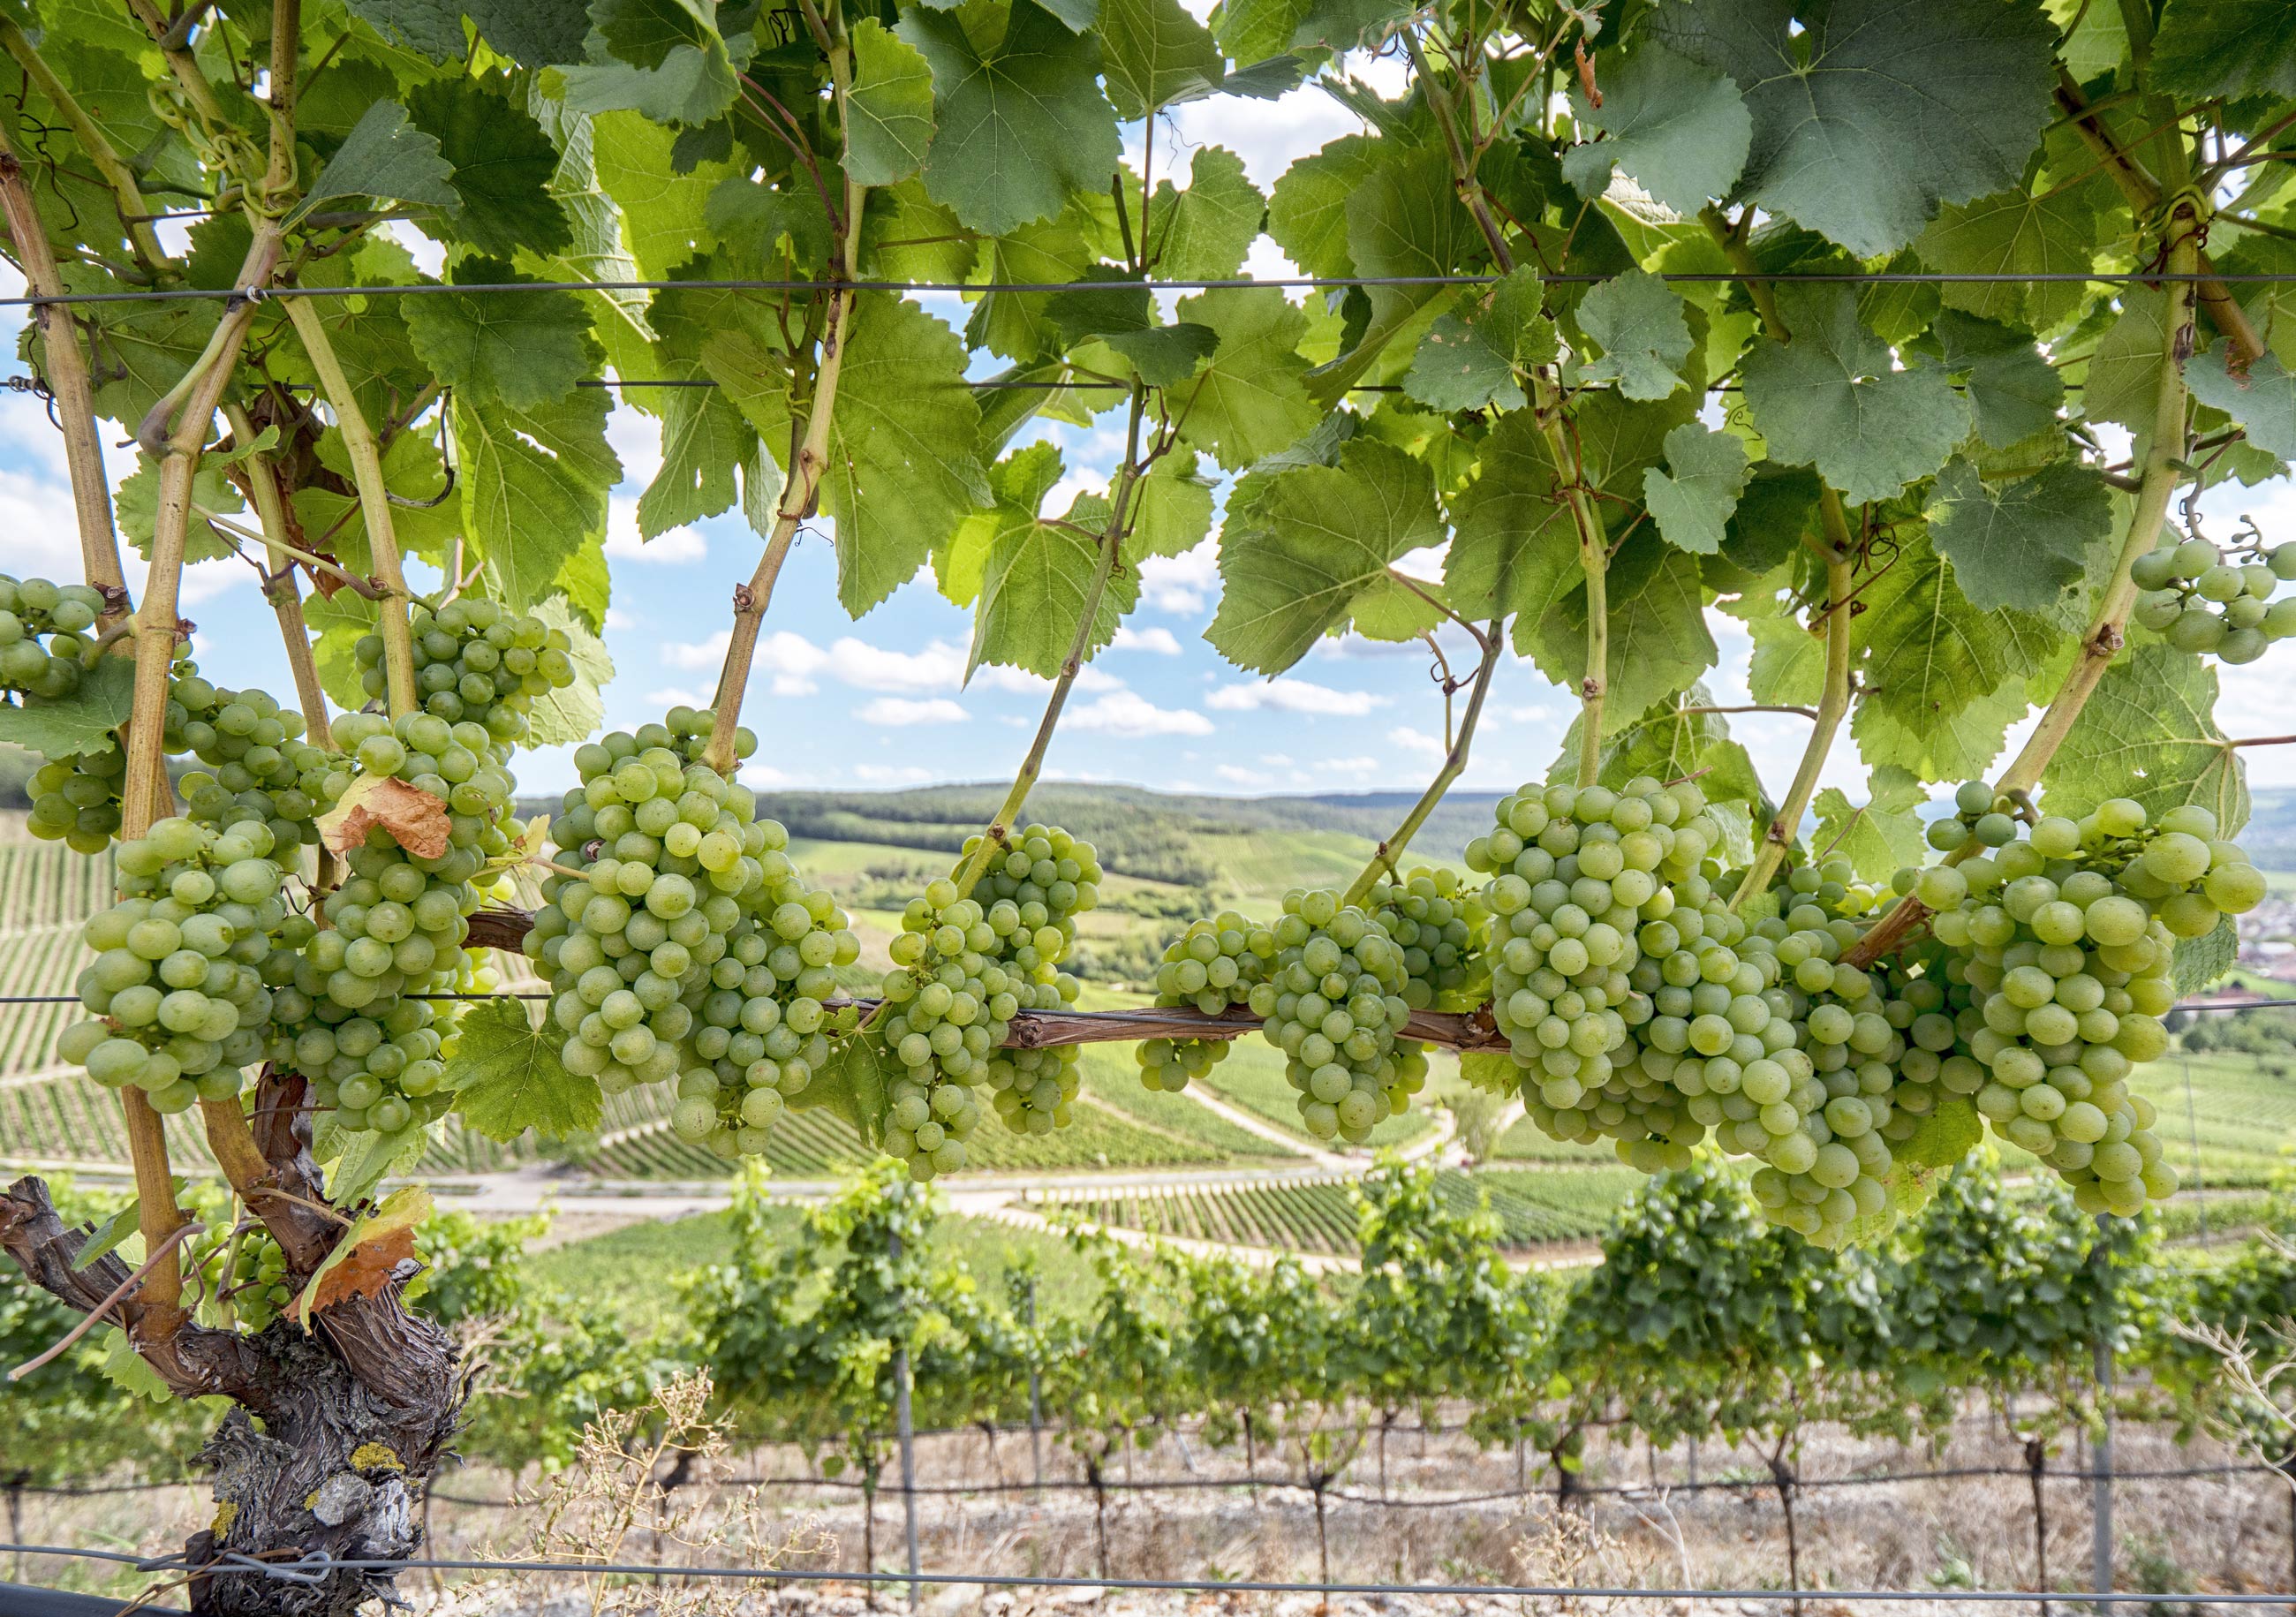 Looking through a vine with ripe green grapes into the rolling hills of the vineyard